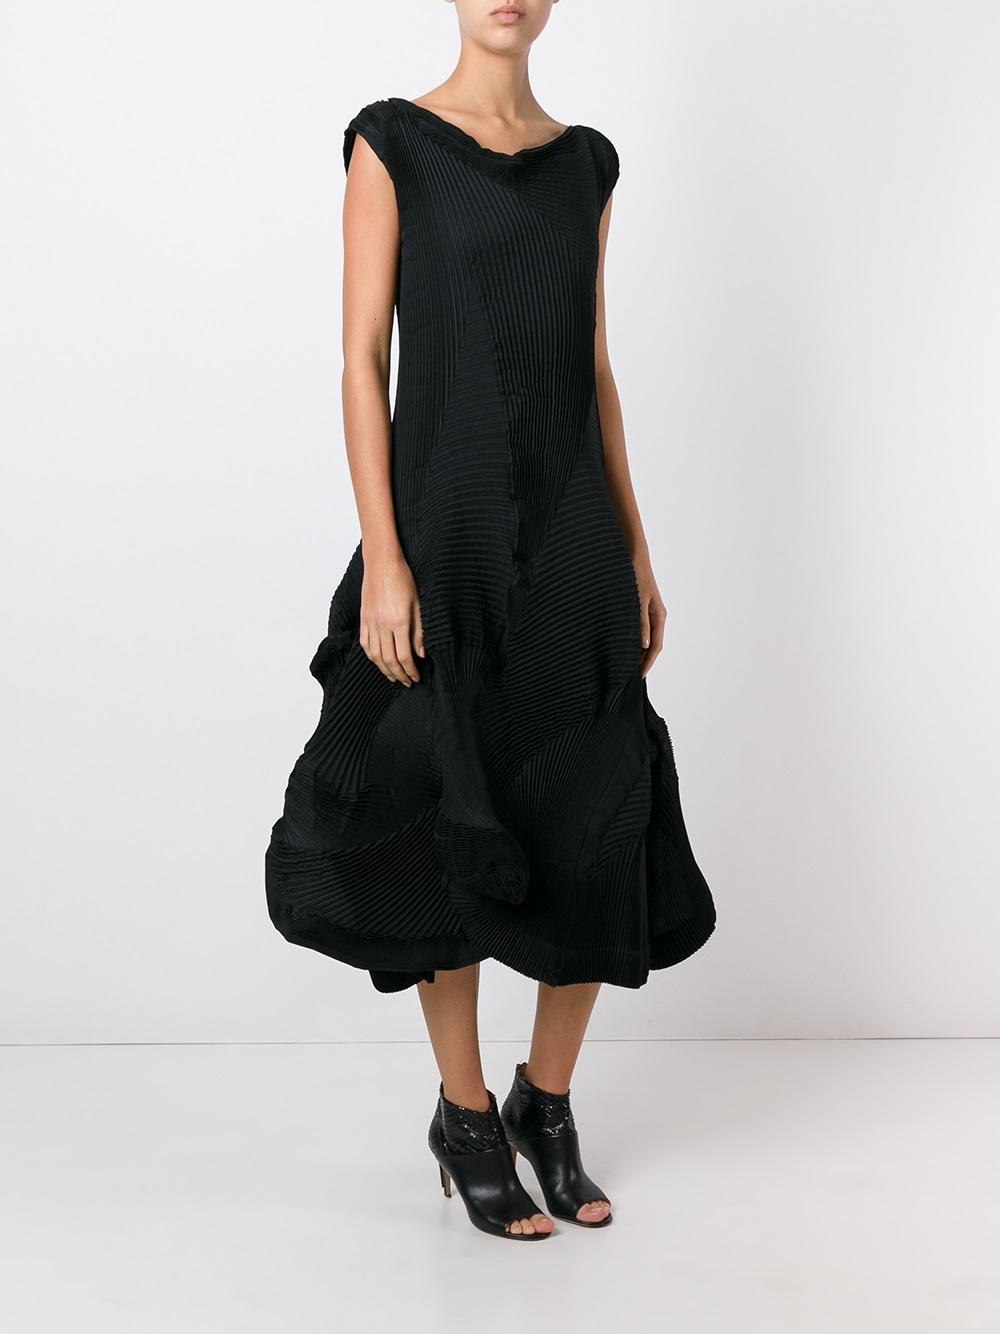 Issey Miyake Synthetic Structured Skirt Dress in Black - Lyst